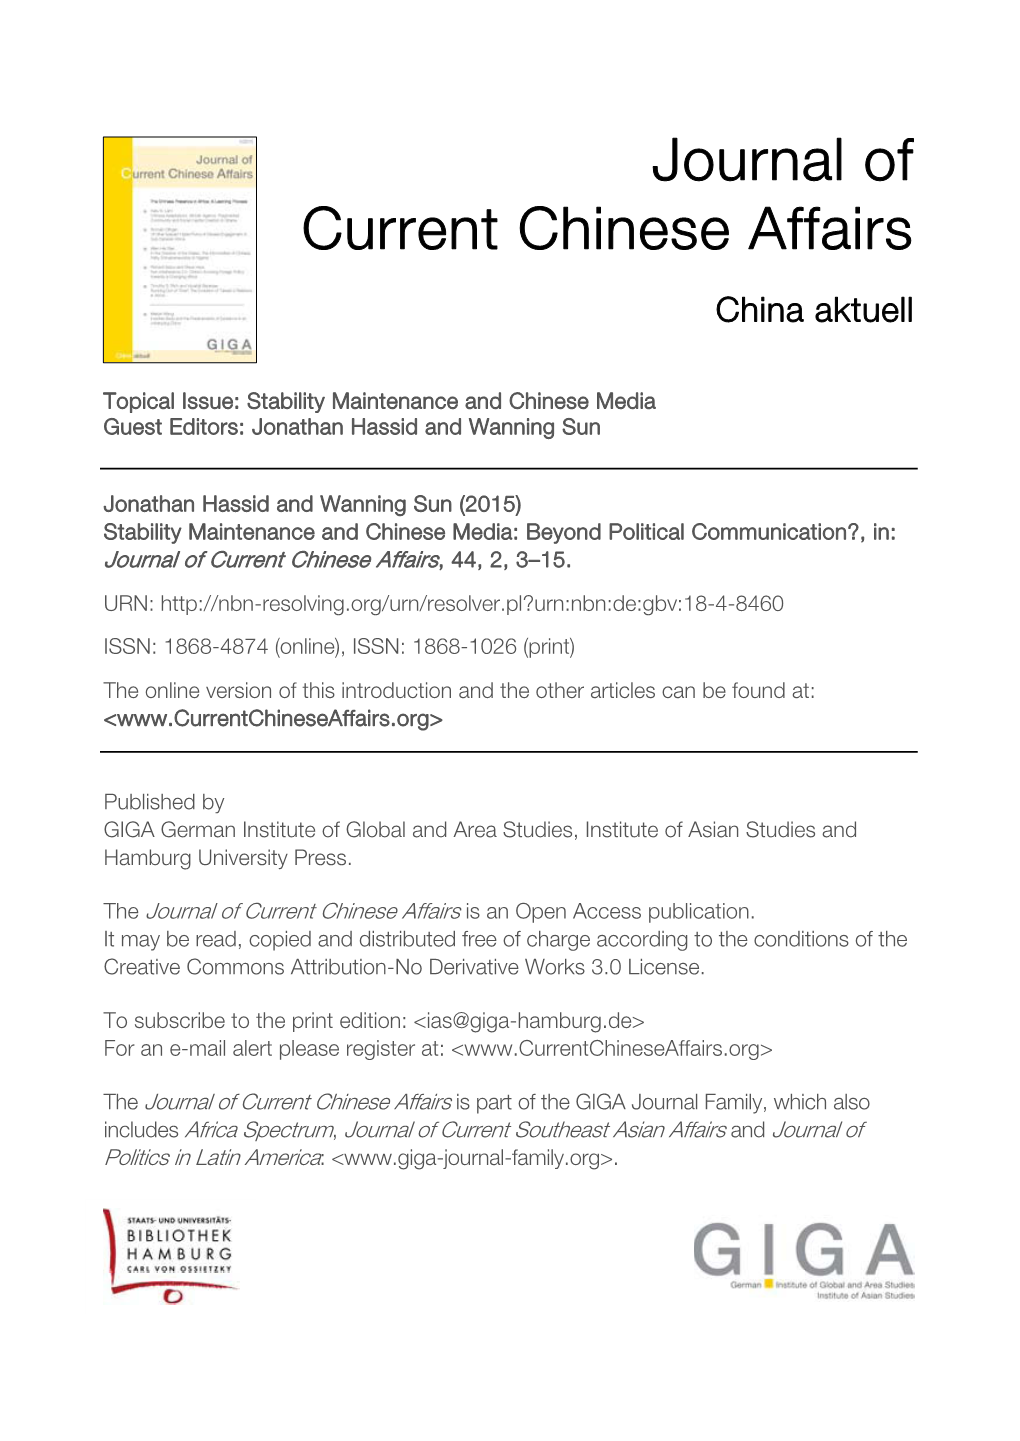 Journal of Current Chinese Affairs Vol 44, No 2